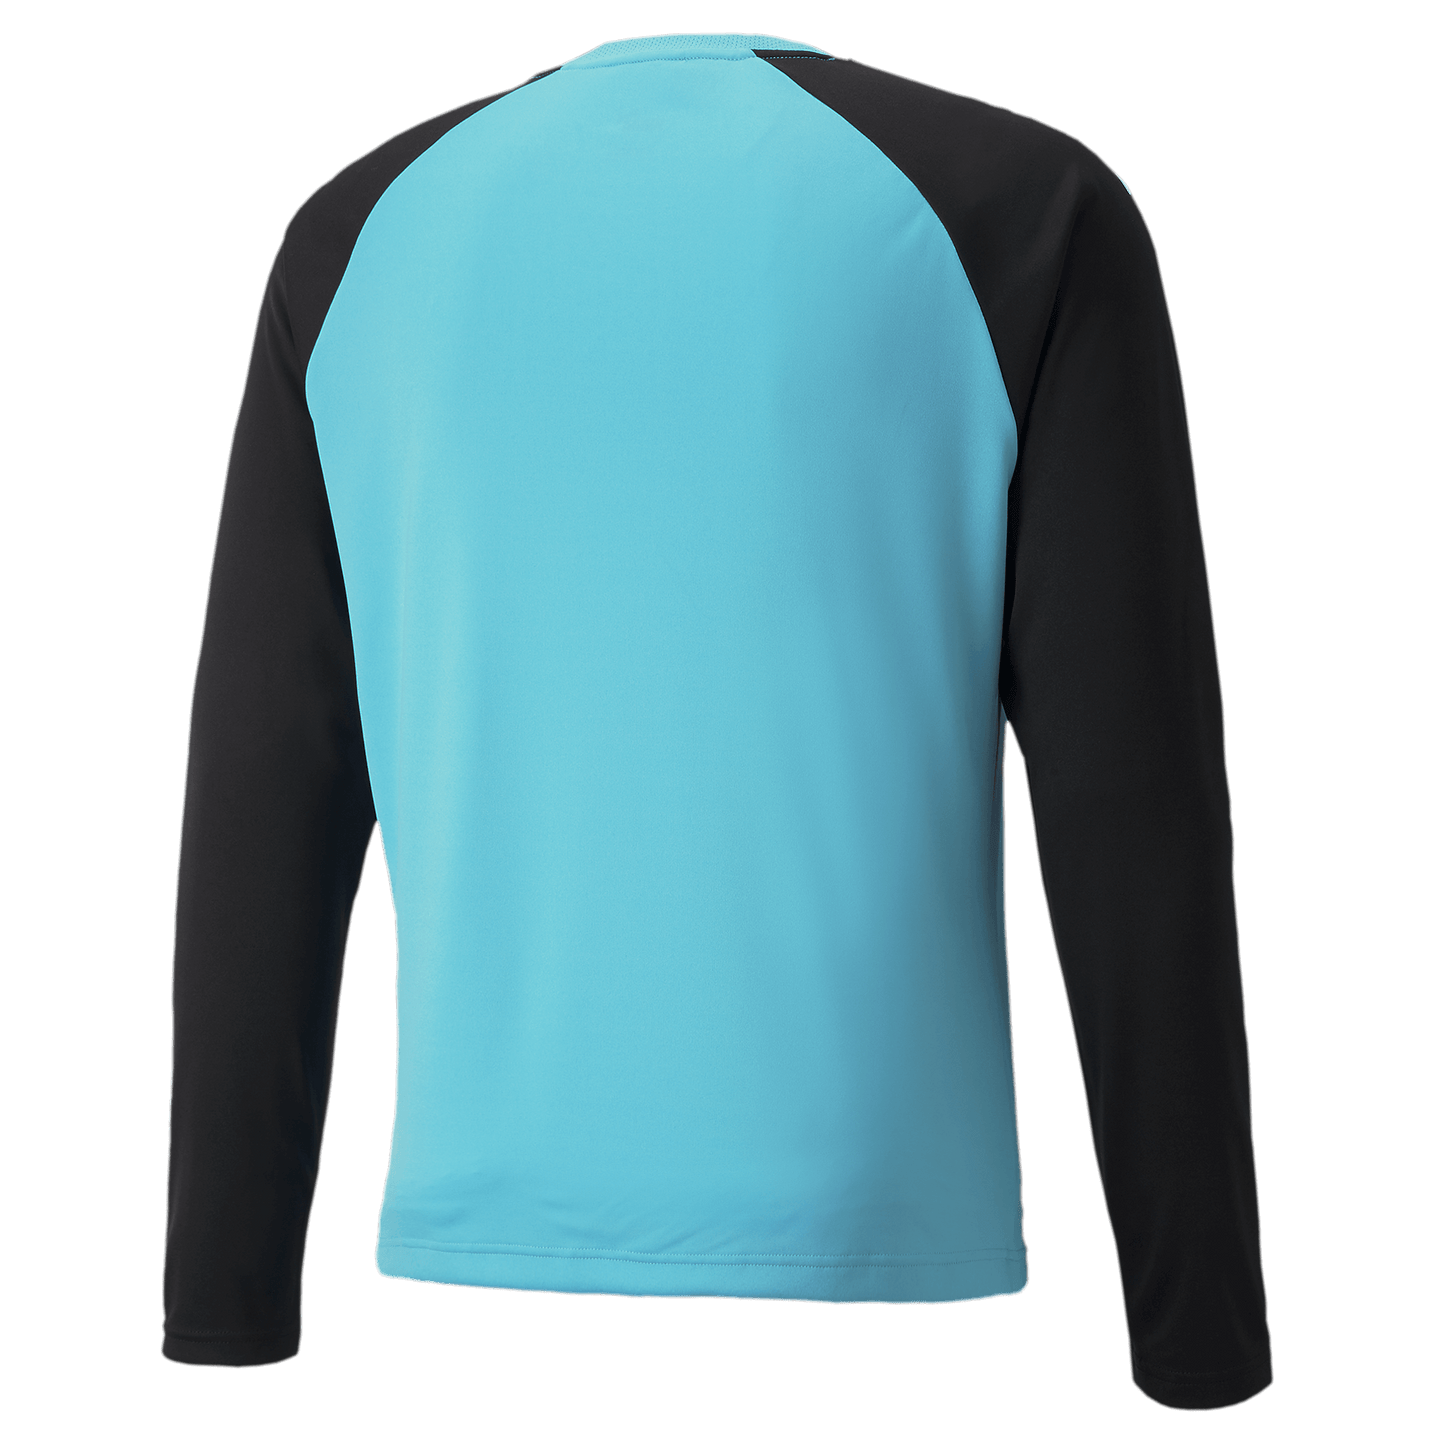 Puma YOUTH Team Pacer GK Jersey Blue Atoll-Black (Back)